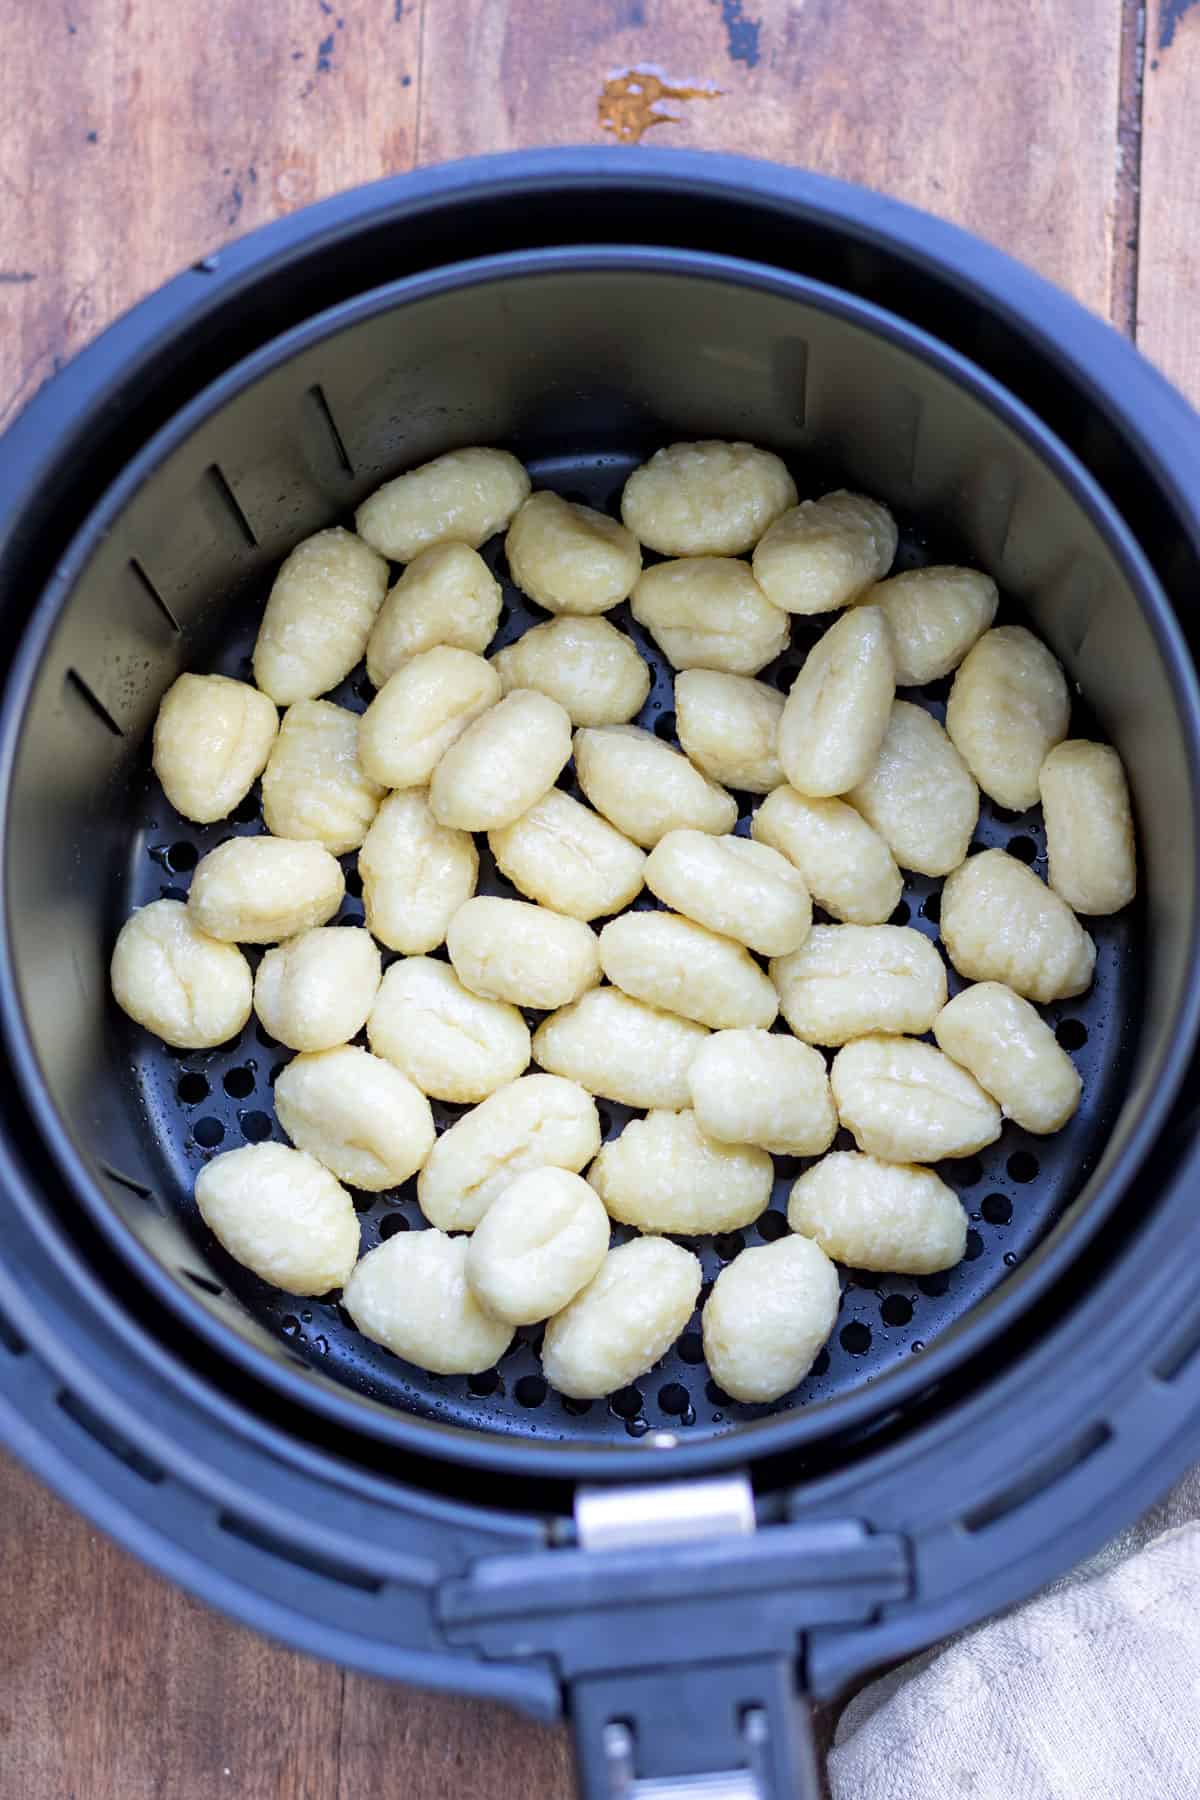 Uncooked gnocchi in an air fryer basket.